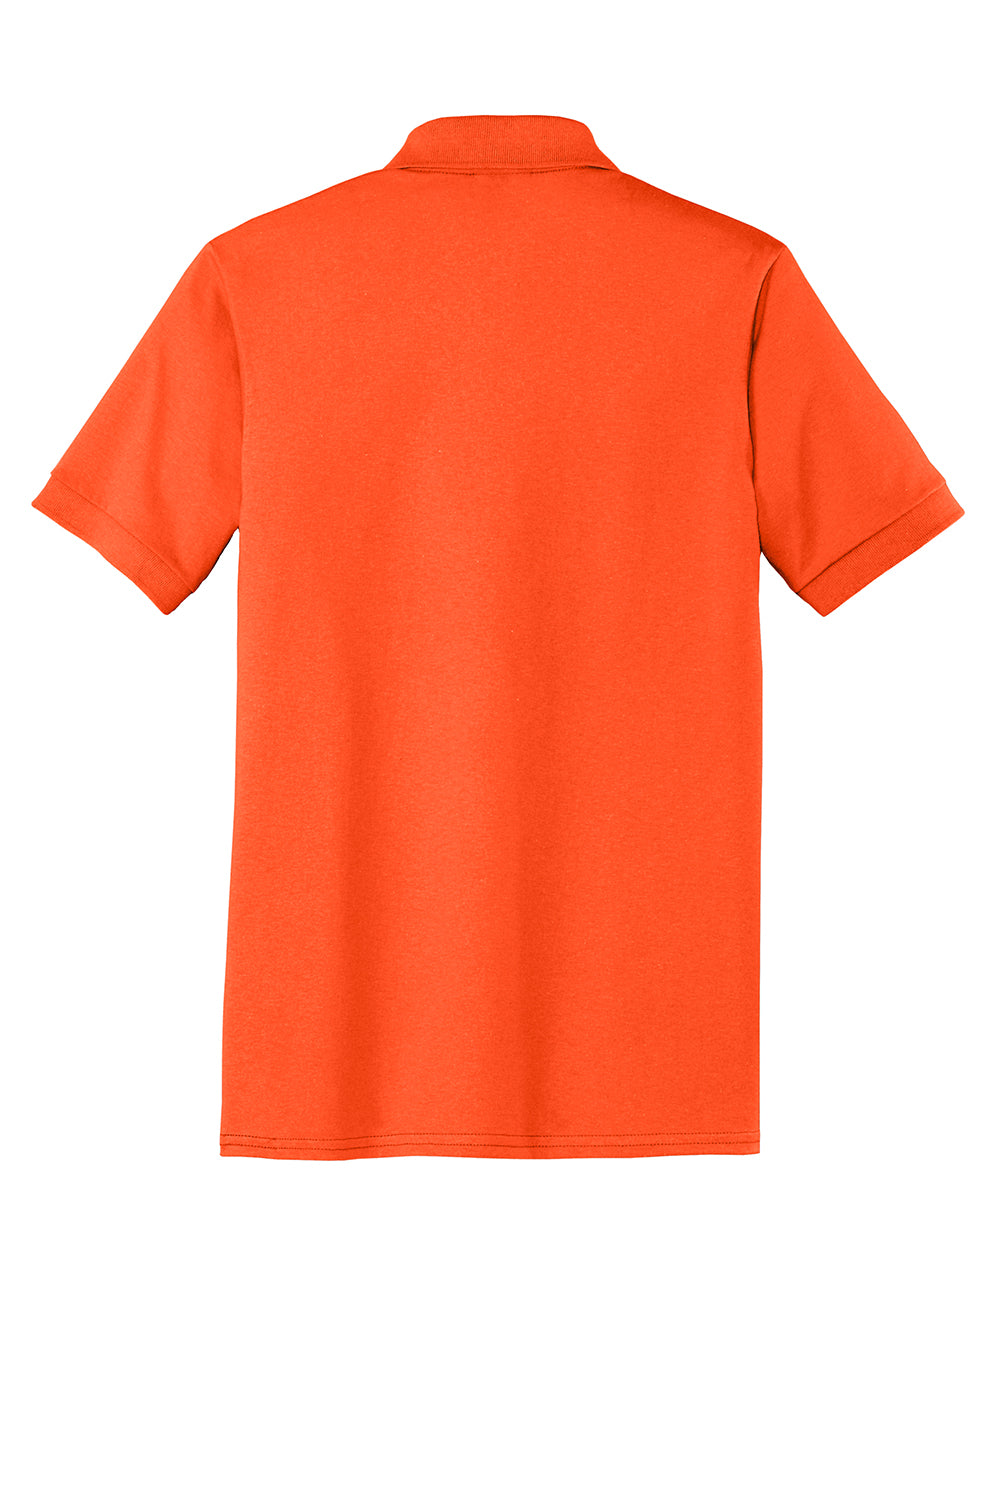 Port & Company KP55P Mens Core Stain Resistant Short Sleeve Polo Shirt w/ Pocket Safety Orange Flat Back